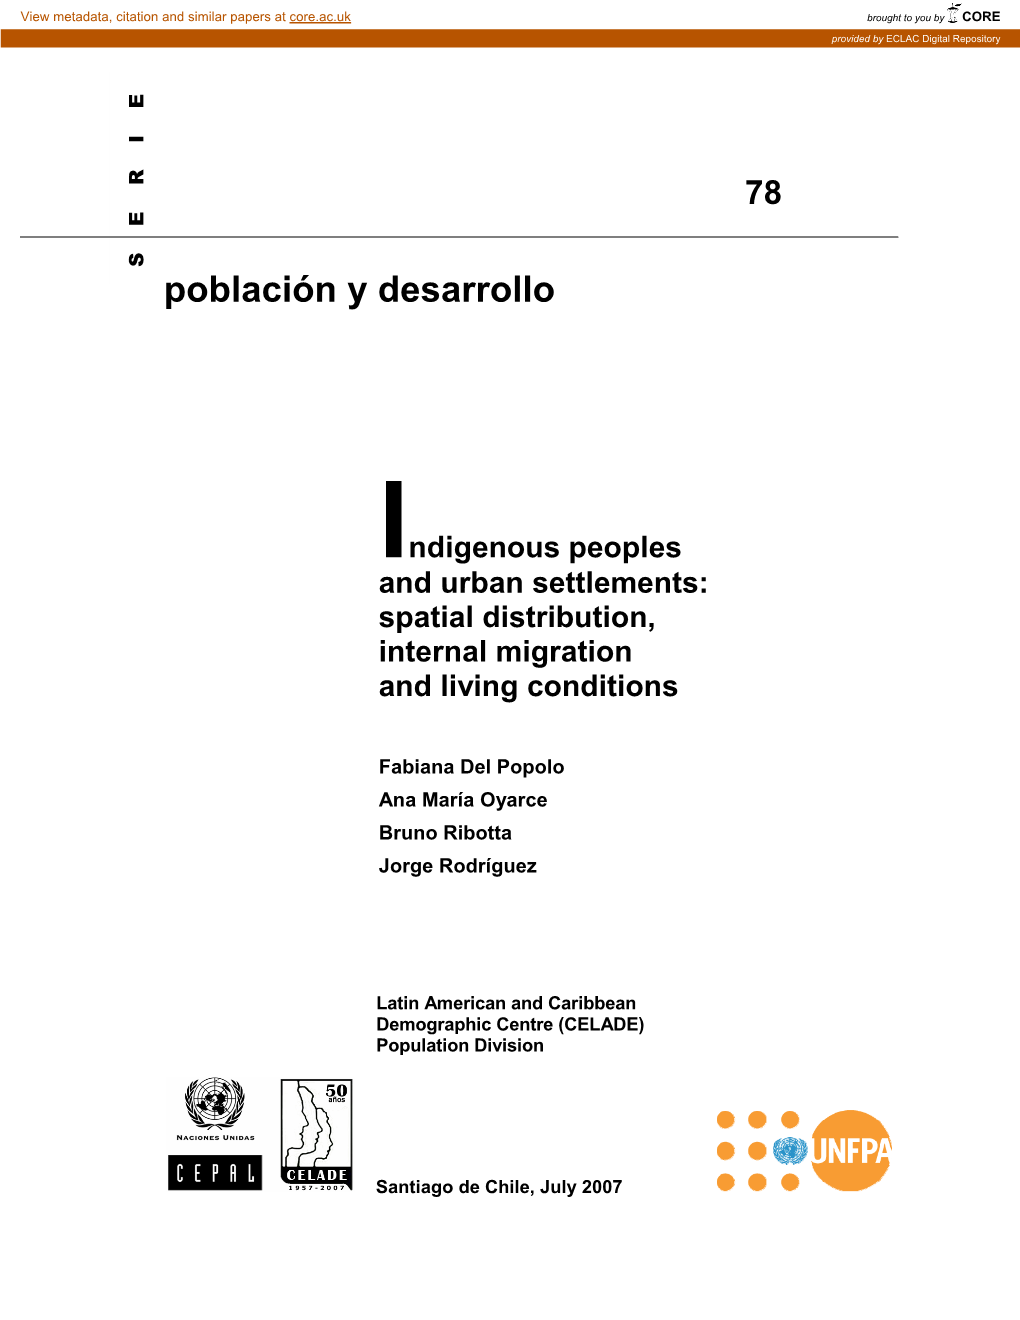 Indigenous Peoples and Urban Settlements: Spatial Distribution, Internal Migration and Living Conditions